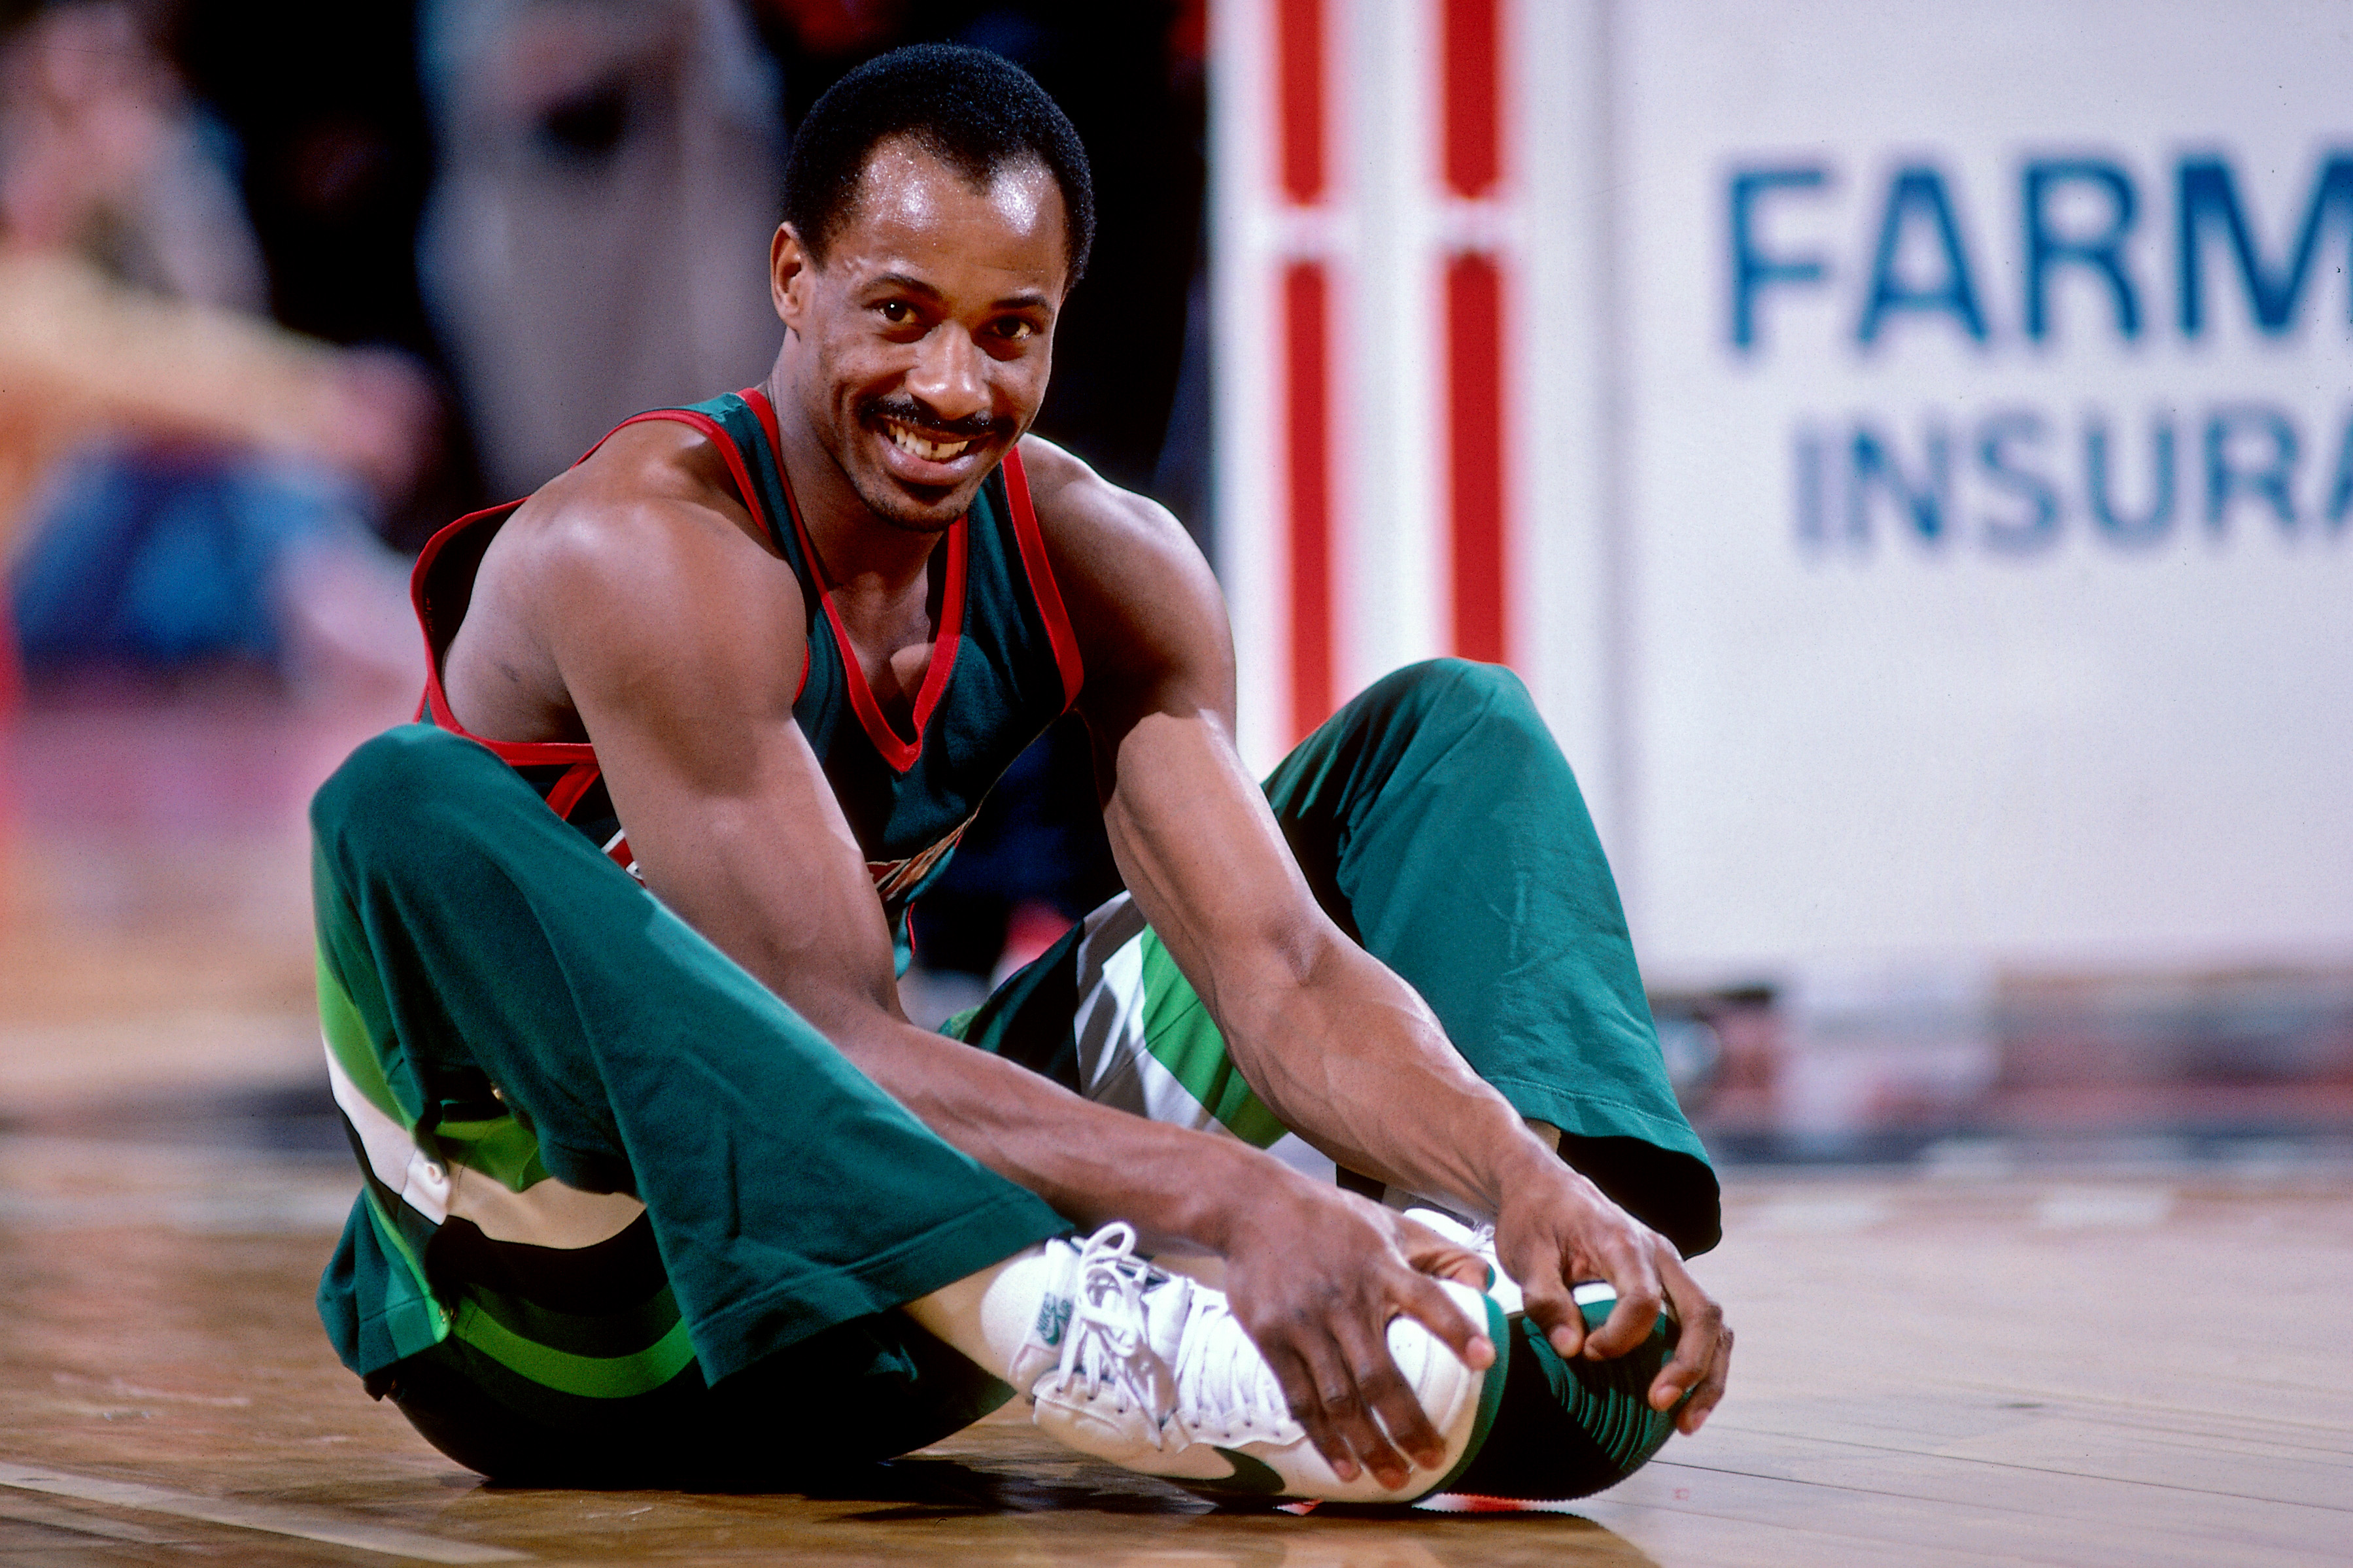 They were like 'You're on your own, buddy' - Sidney Moncrief